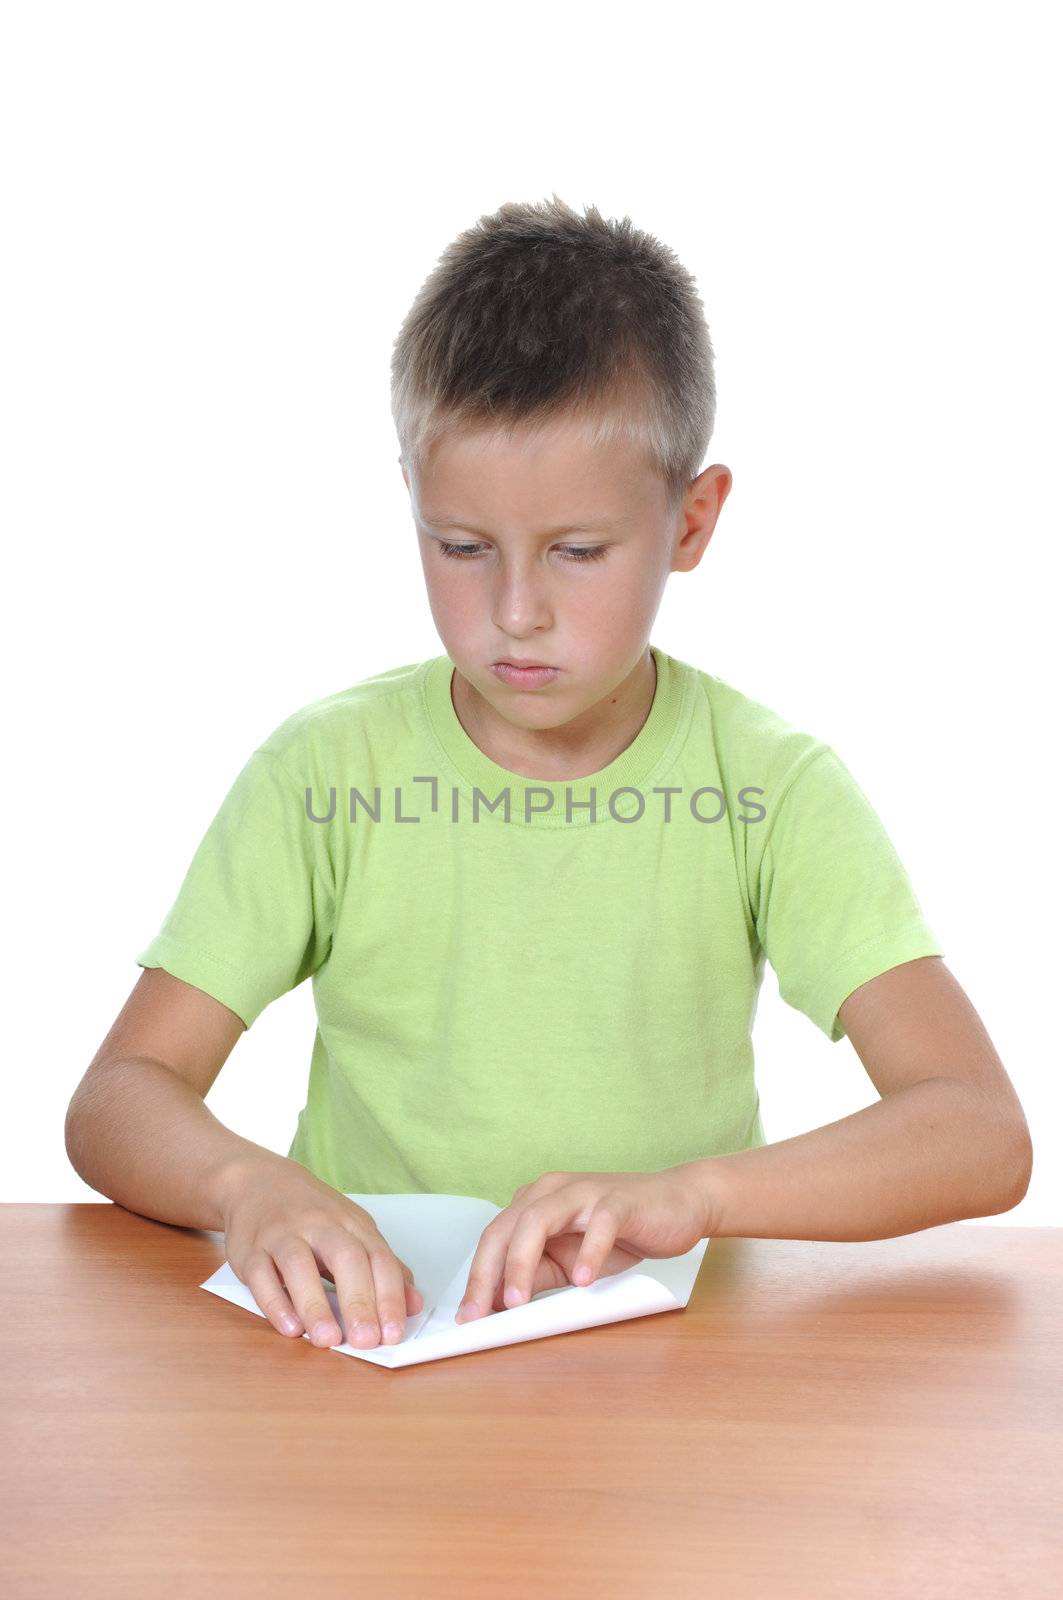 The boy with the paper behind a table over white